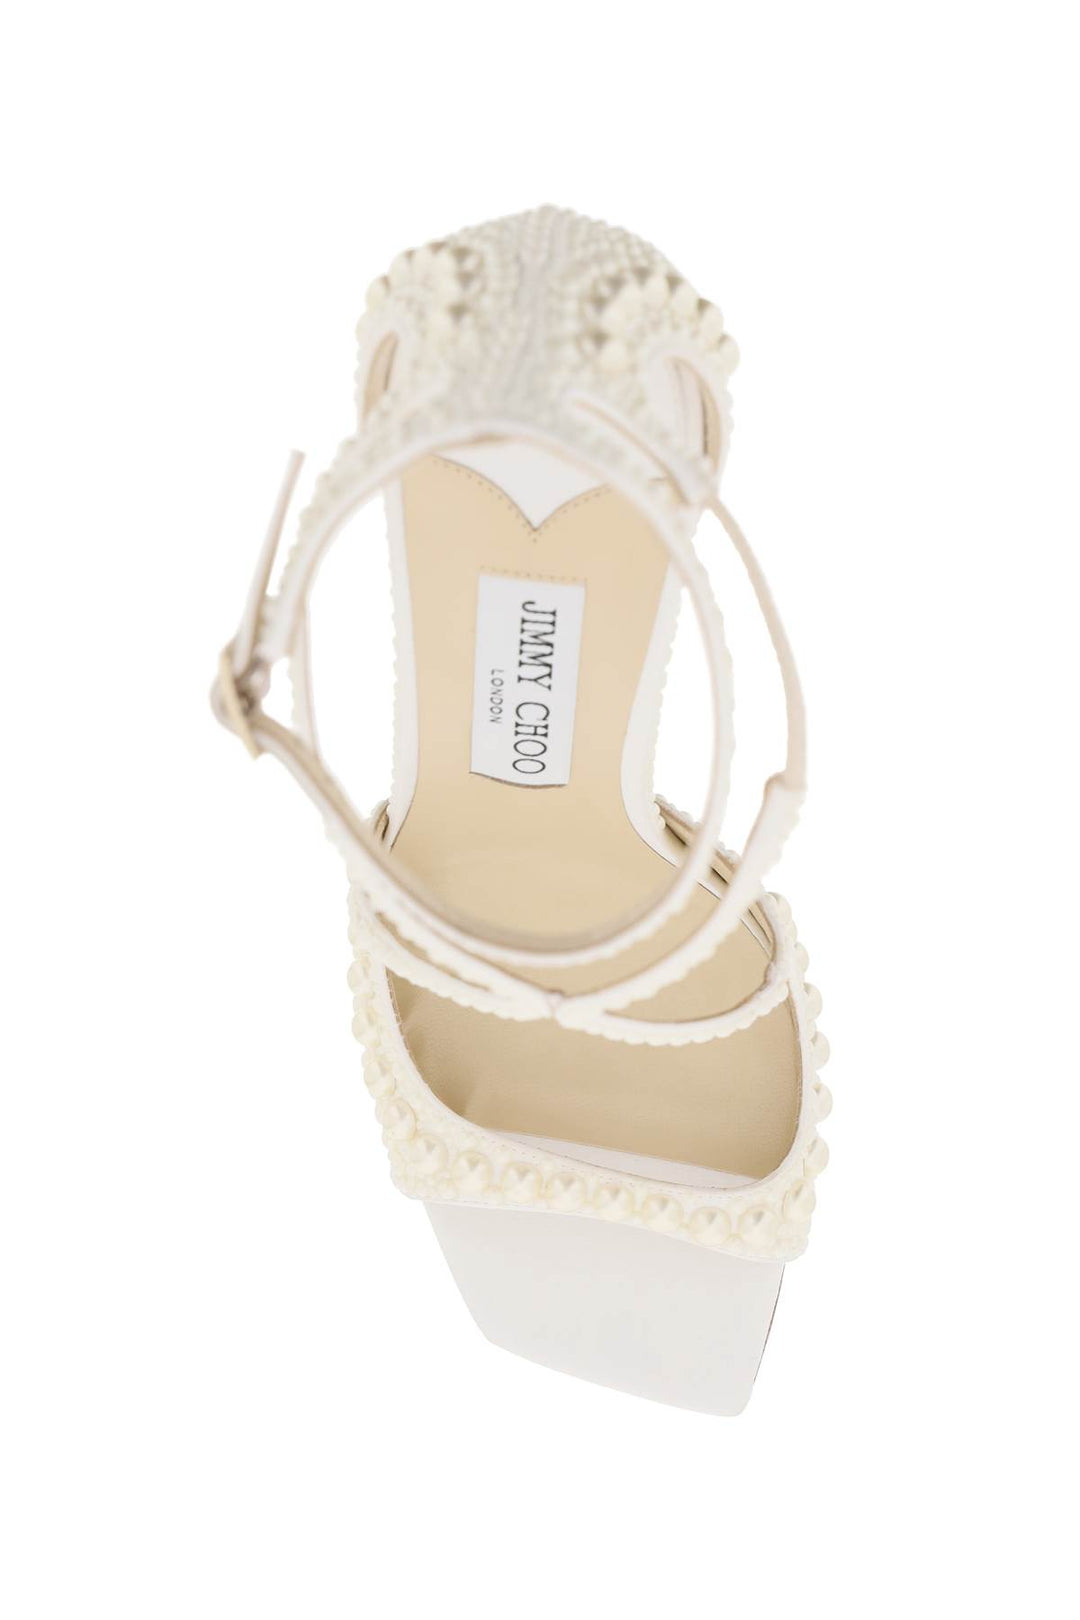 Jimmy Choo Azia 95 Sandals With Pearls   Black